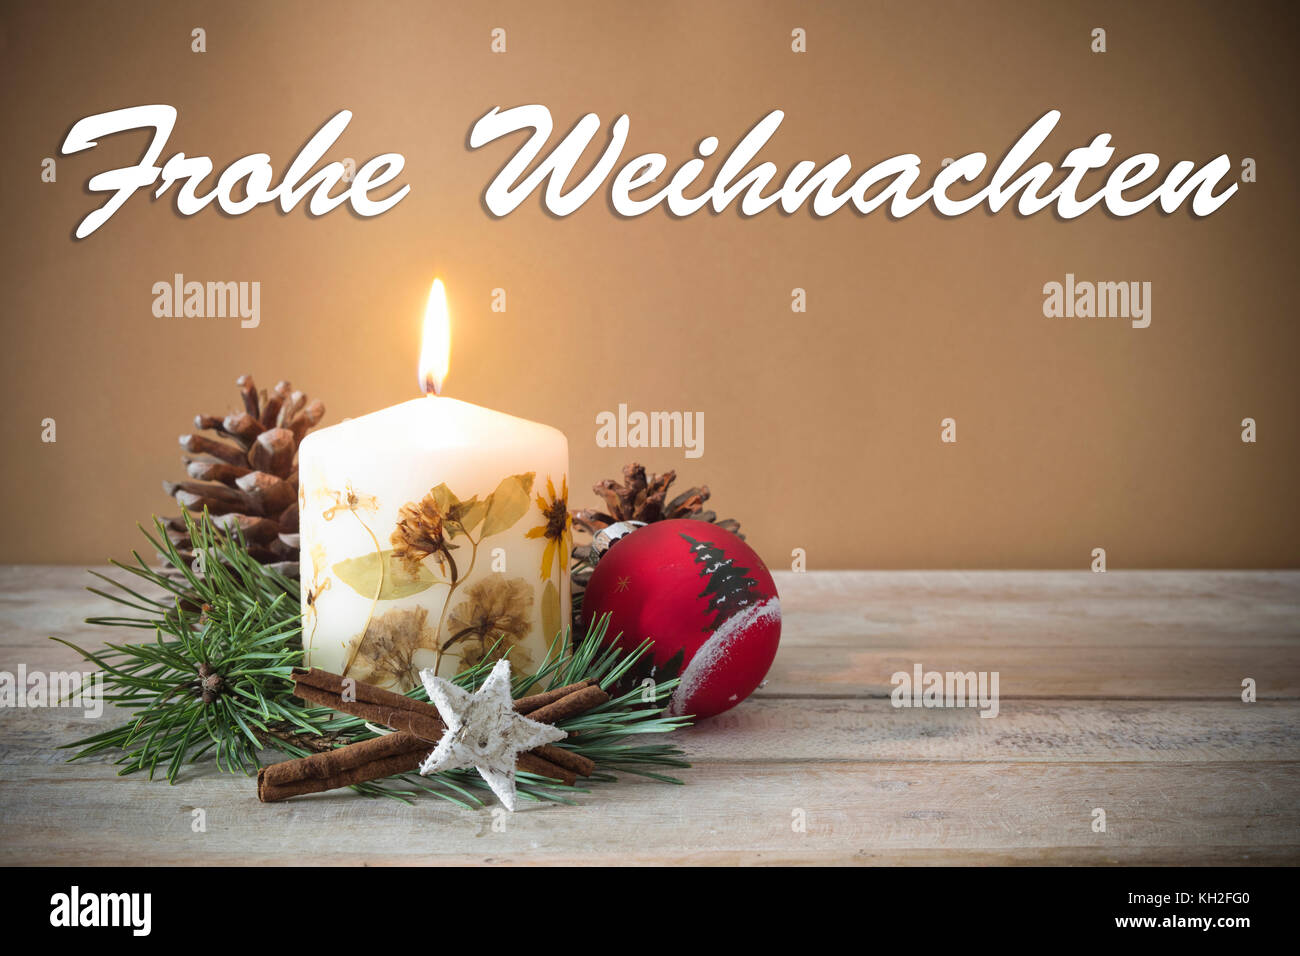 Christmas decoration with candle, pine, bauble, with text in German 'Frohe Weihnachten' in wooden background. Stock Photo